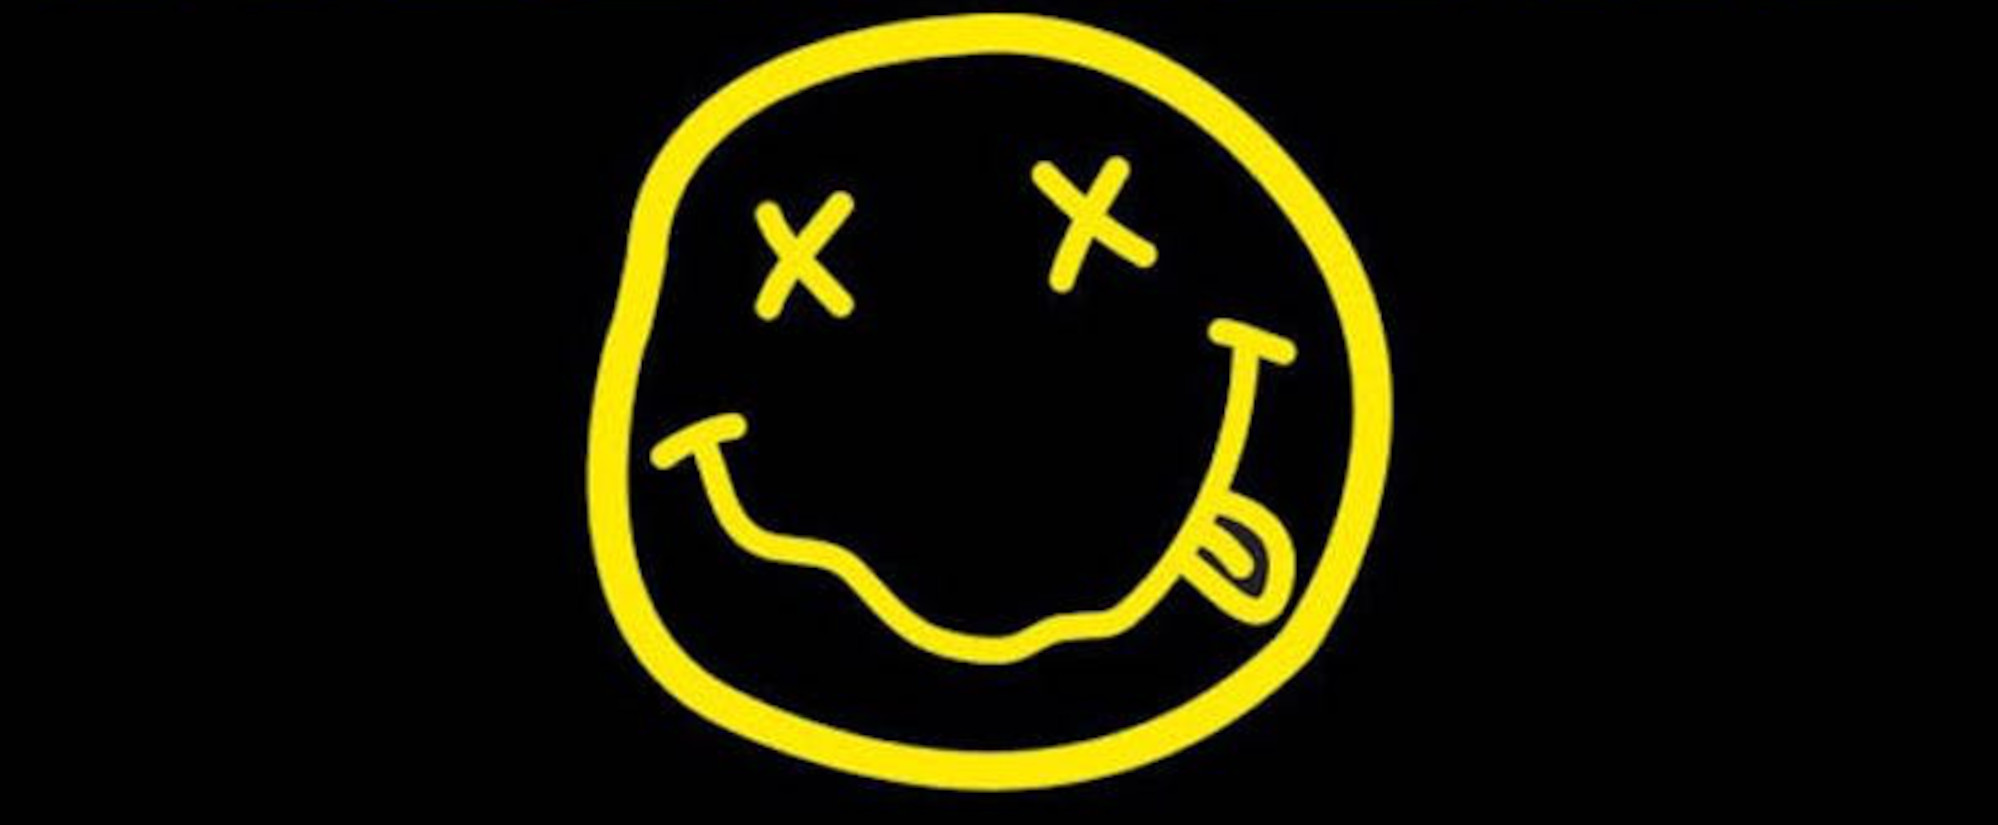 The Story and Meaning Behind Nirvana’s Infamous Smiley Face Logo